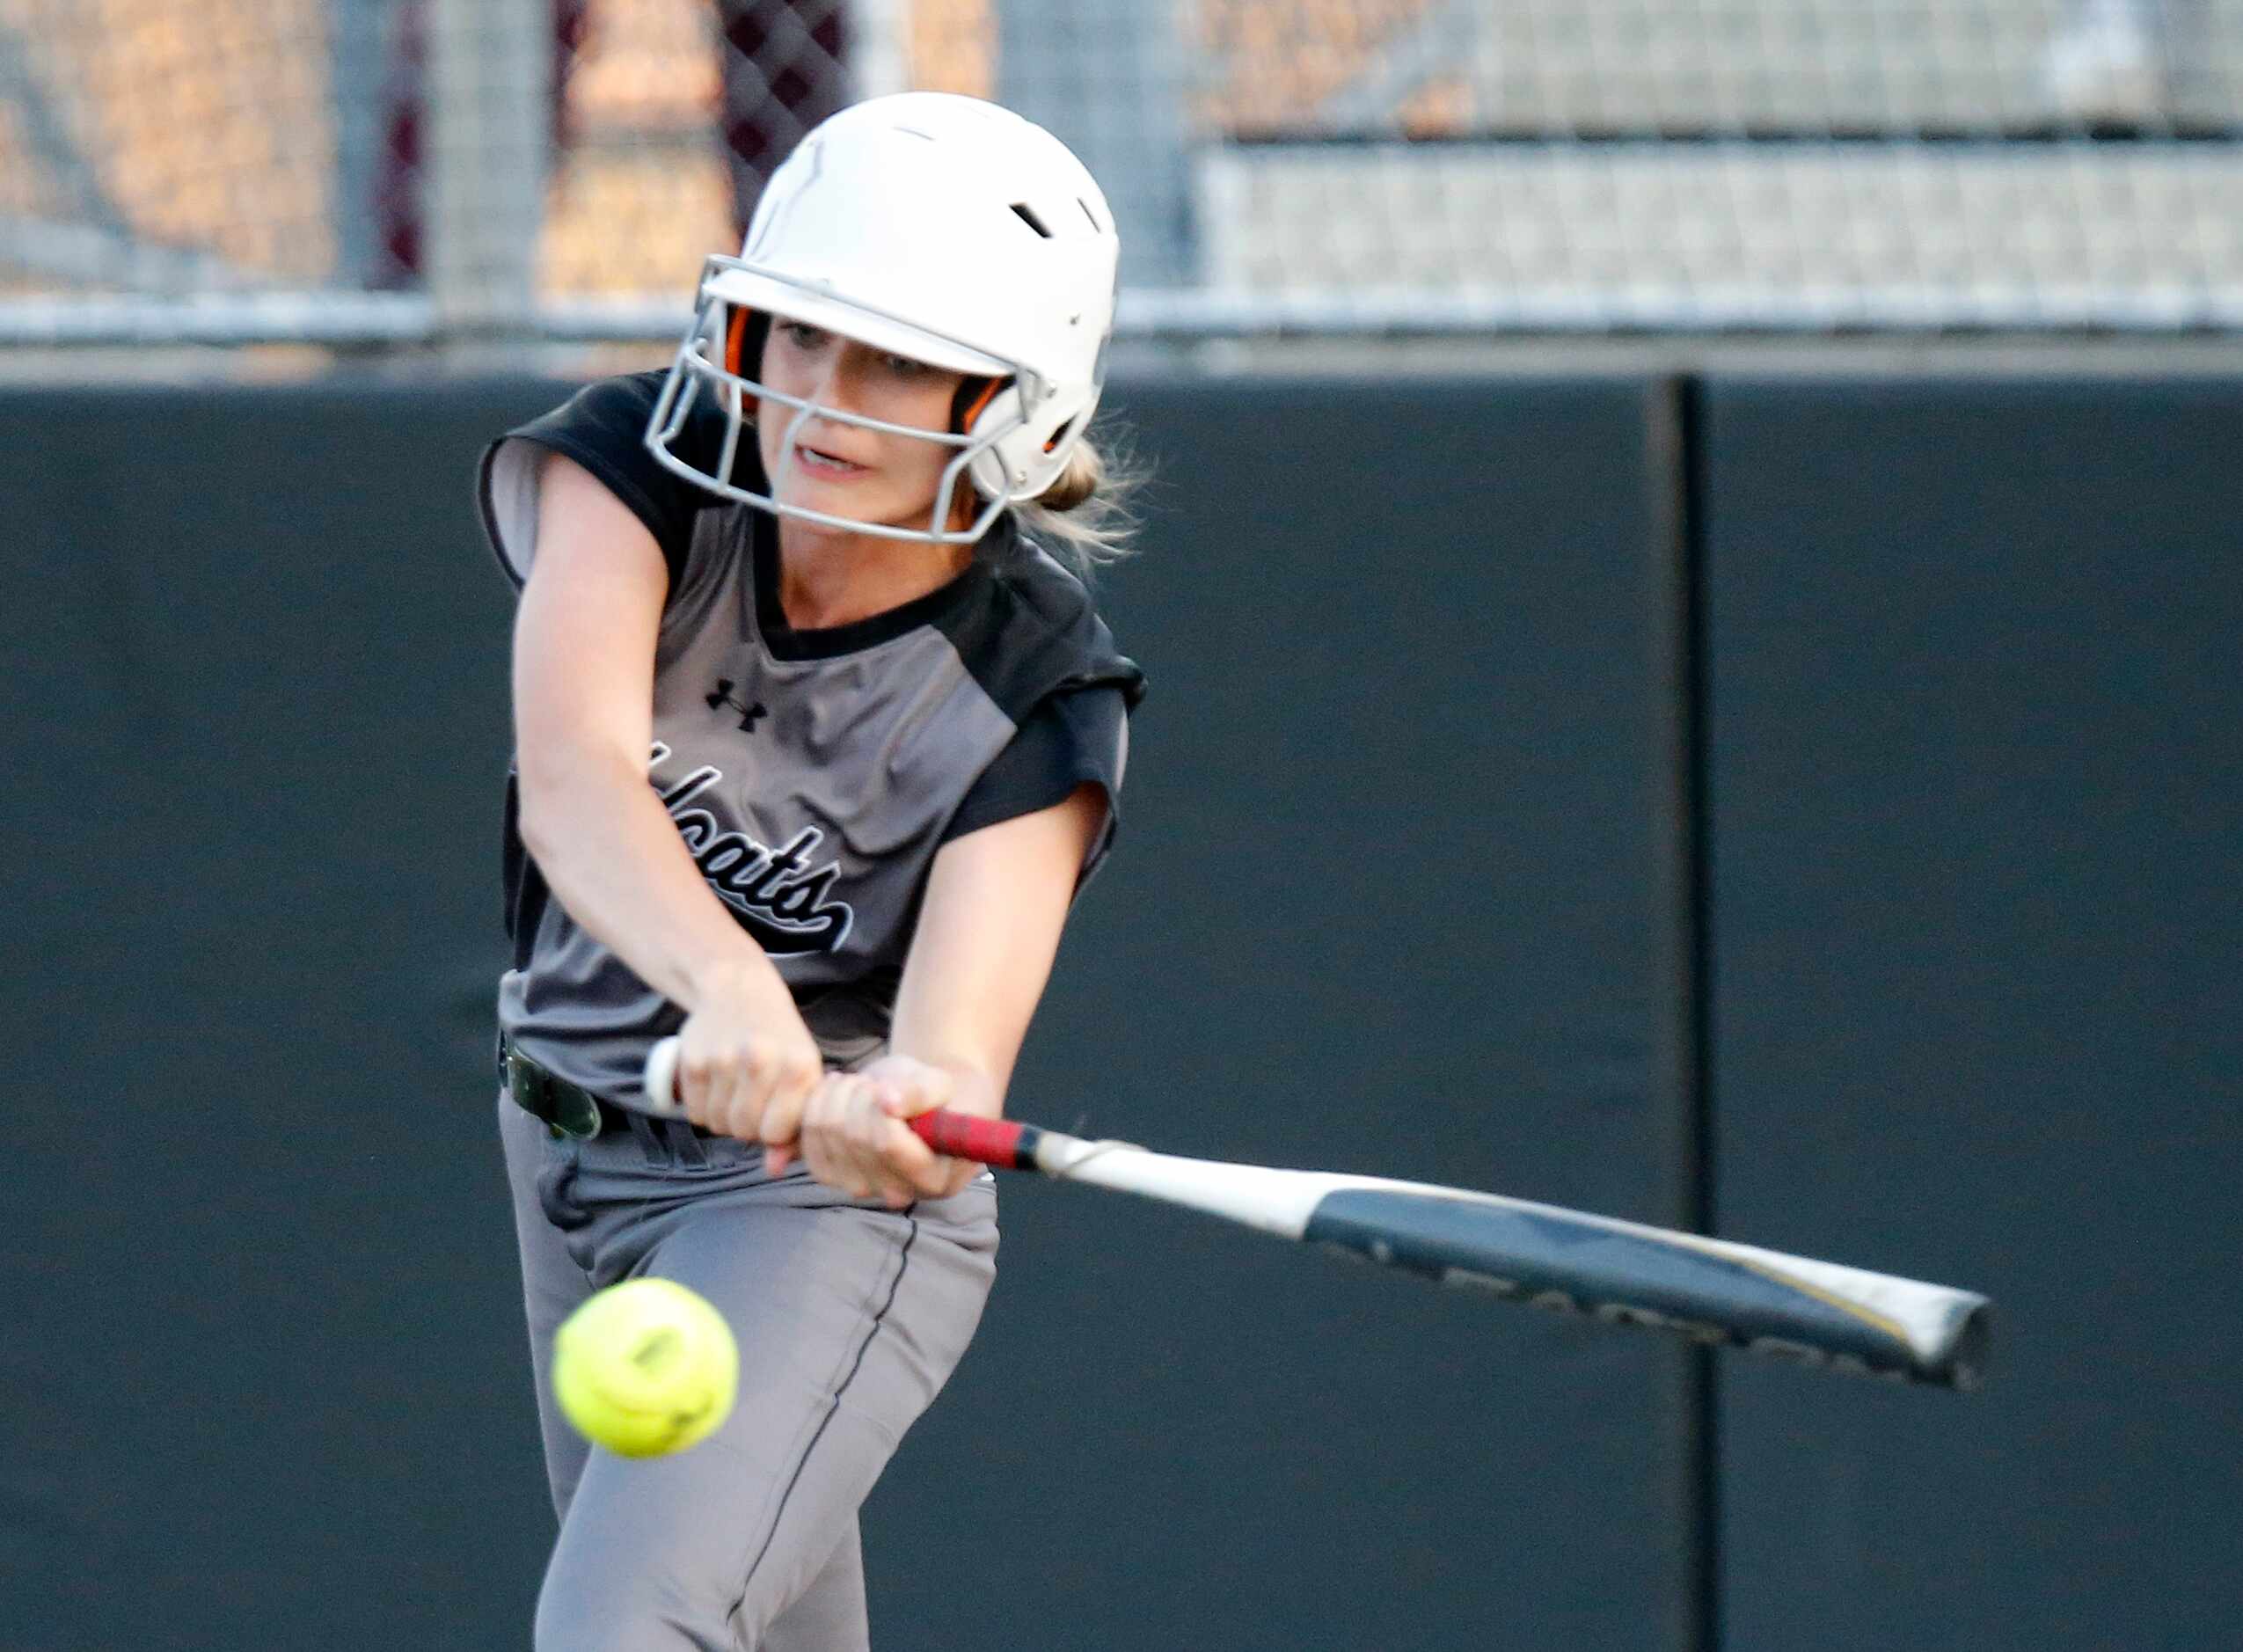 Denton Guyer High School outfielder Abby Holder (3) takes a swing in the first inning as...